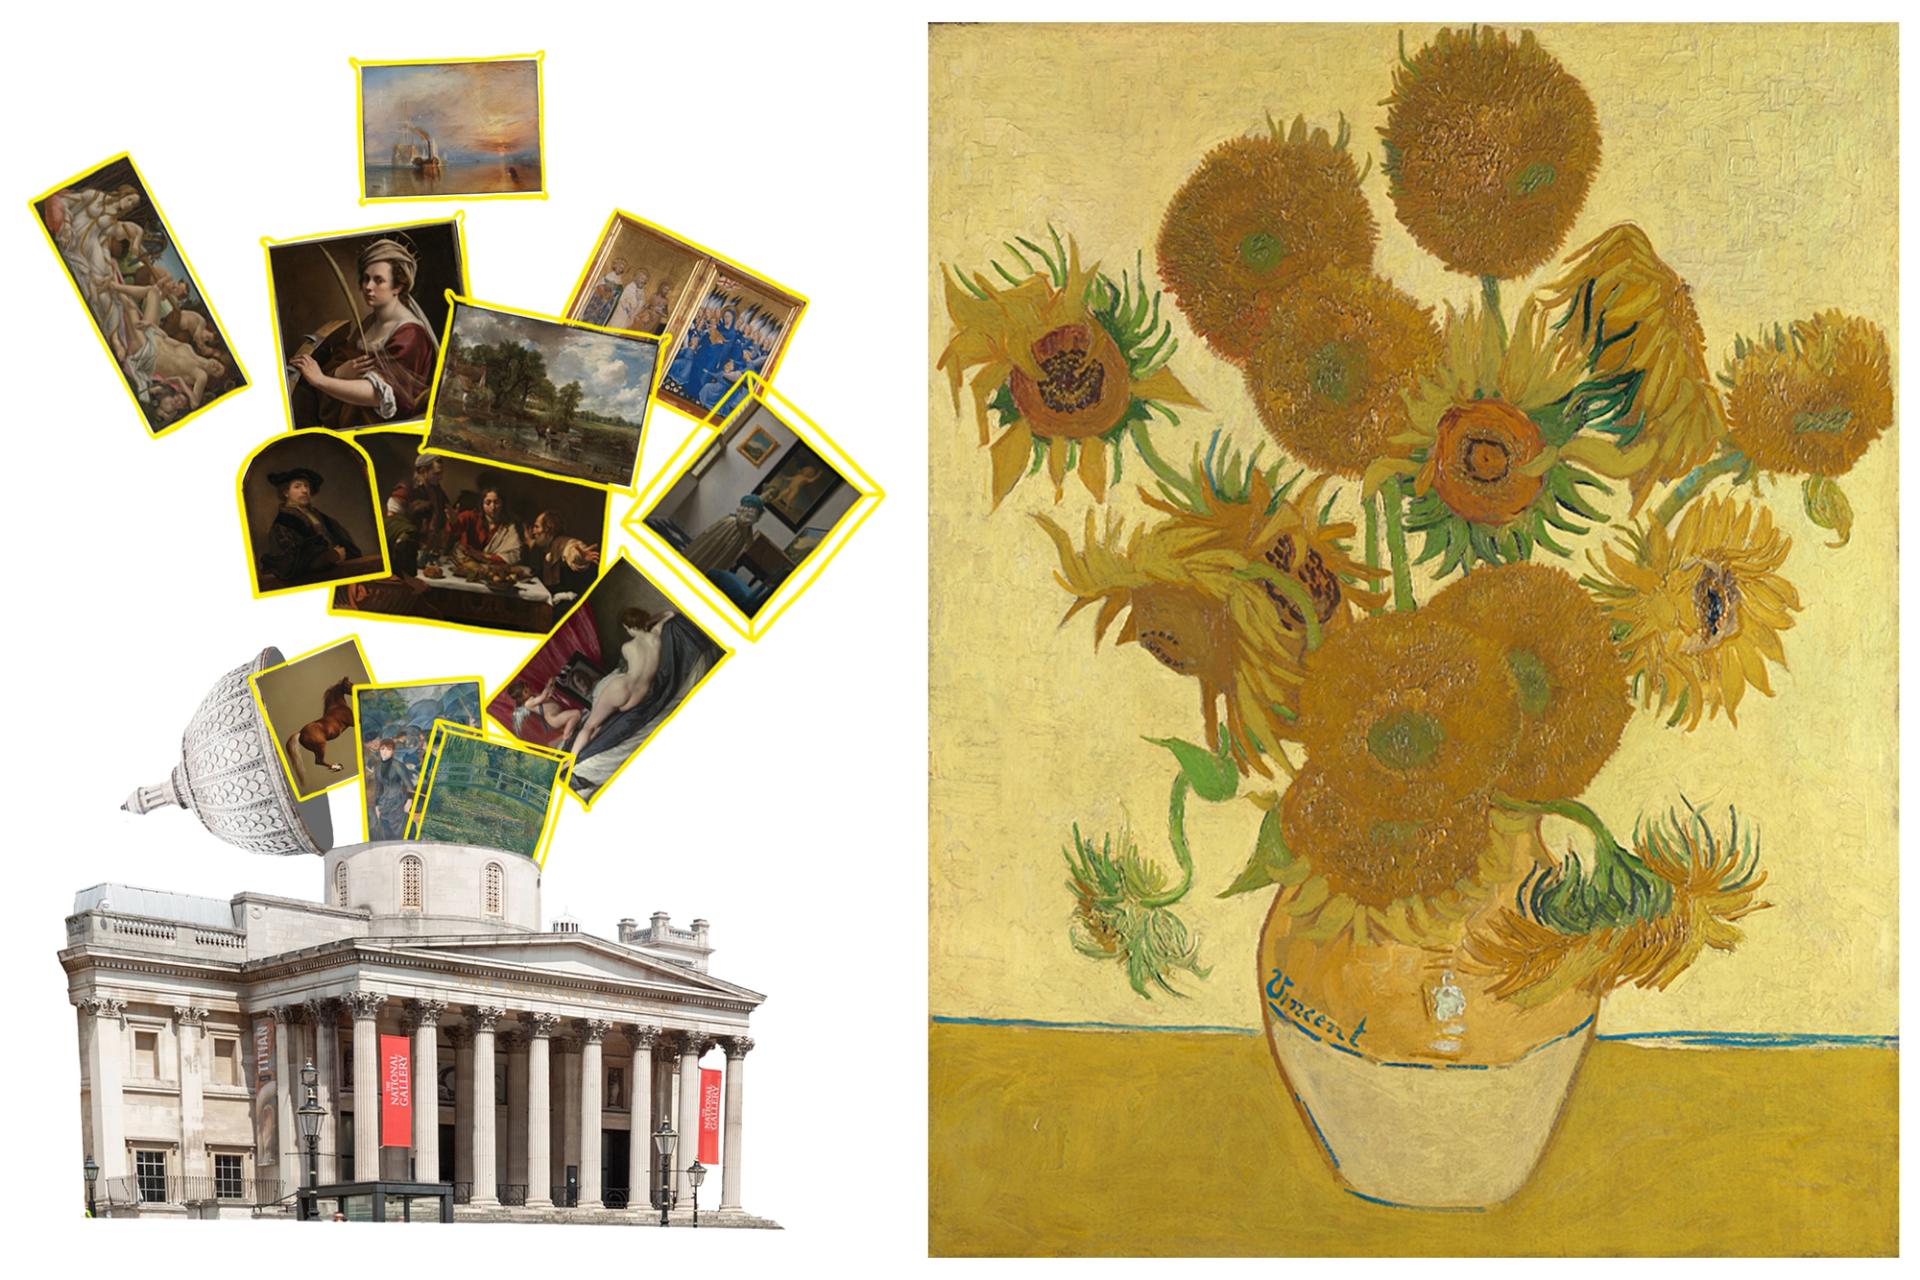 The National Gallery in London is home to Van Gogh's greatest Sunflowe paintings, truly a "national treasure" © The National Gallery, London